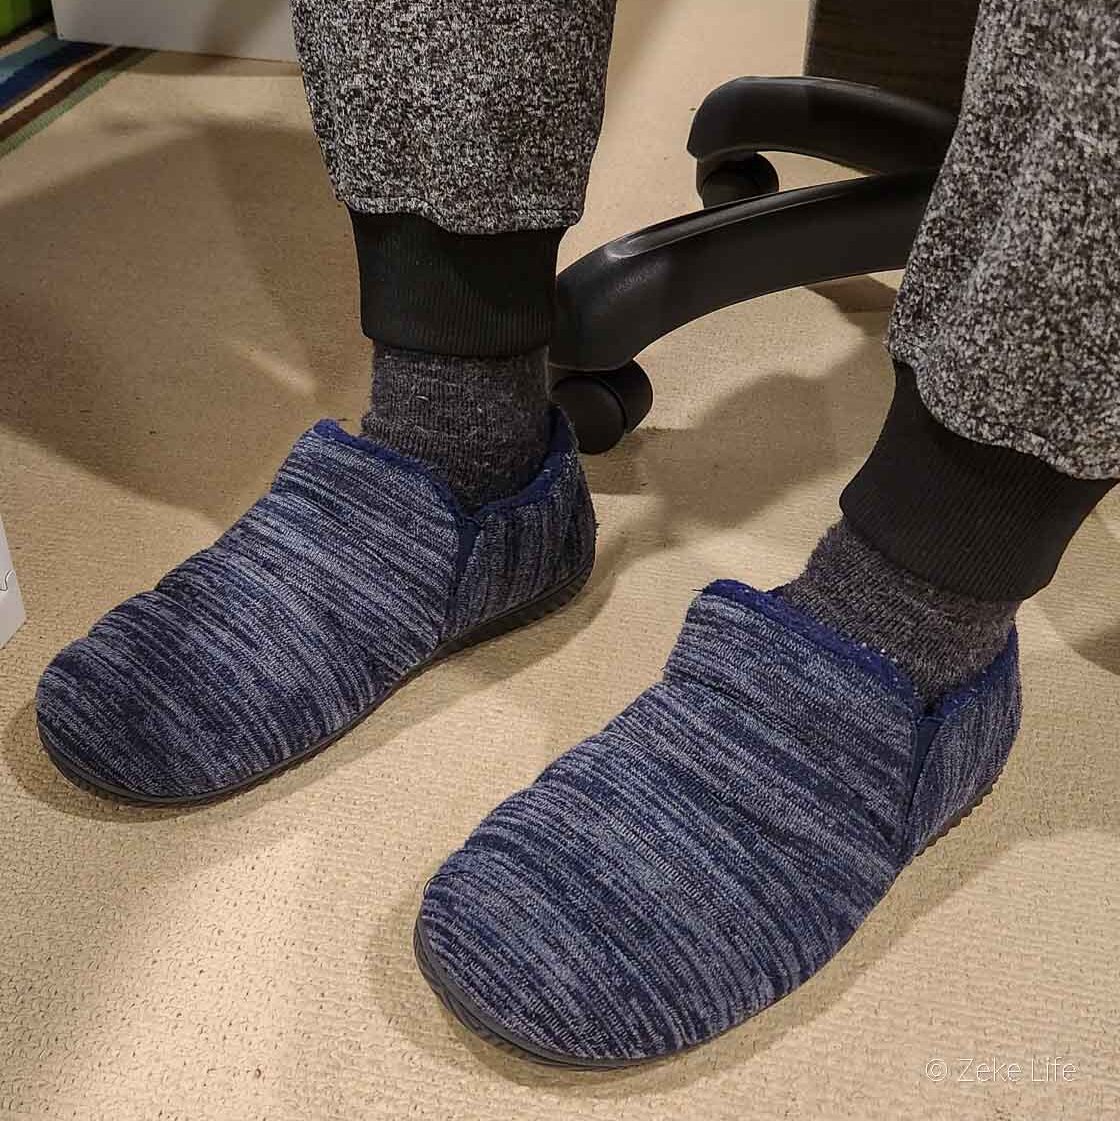 kyle slippers in basement